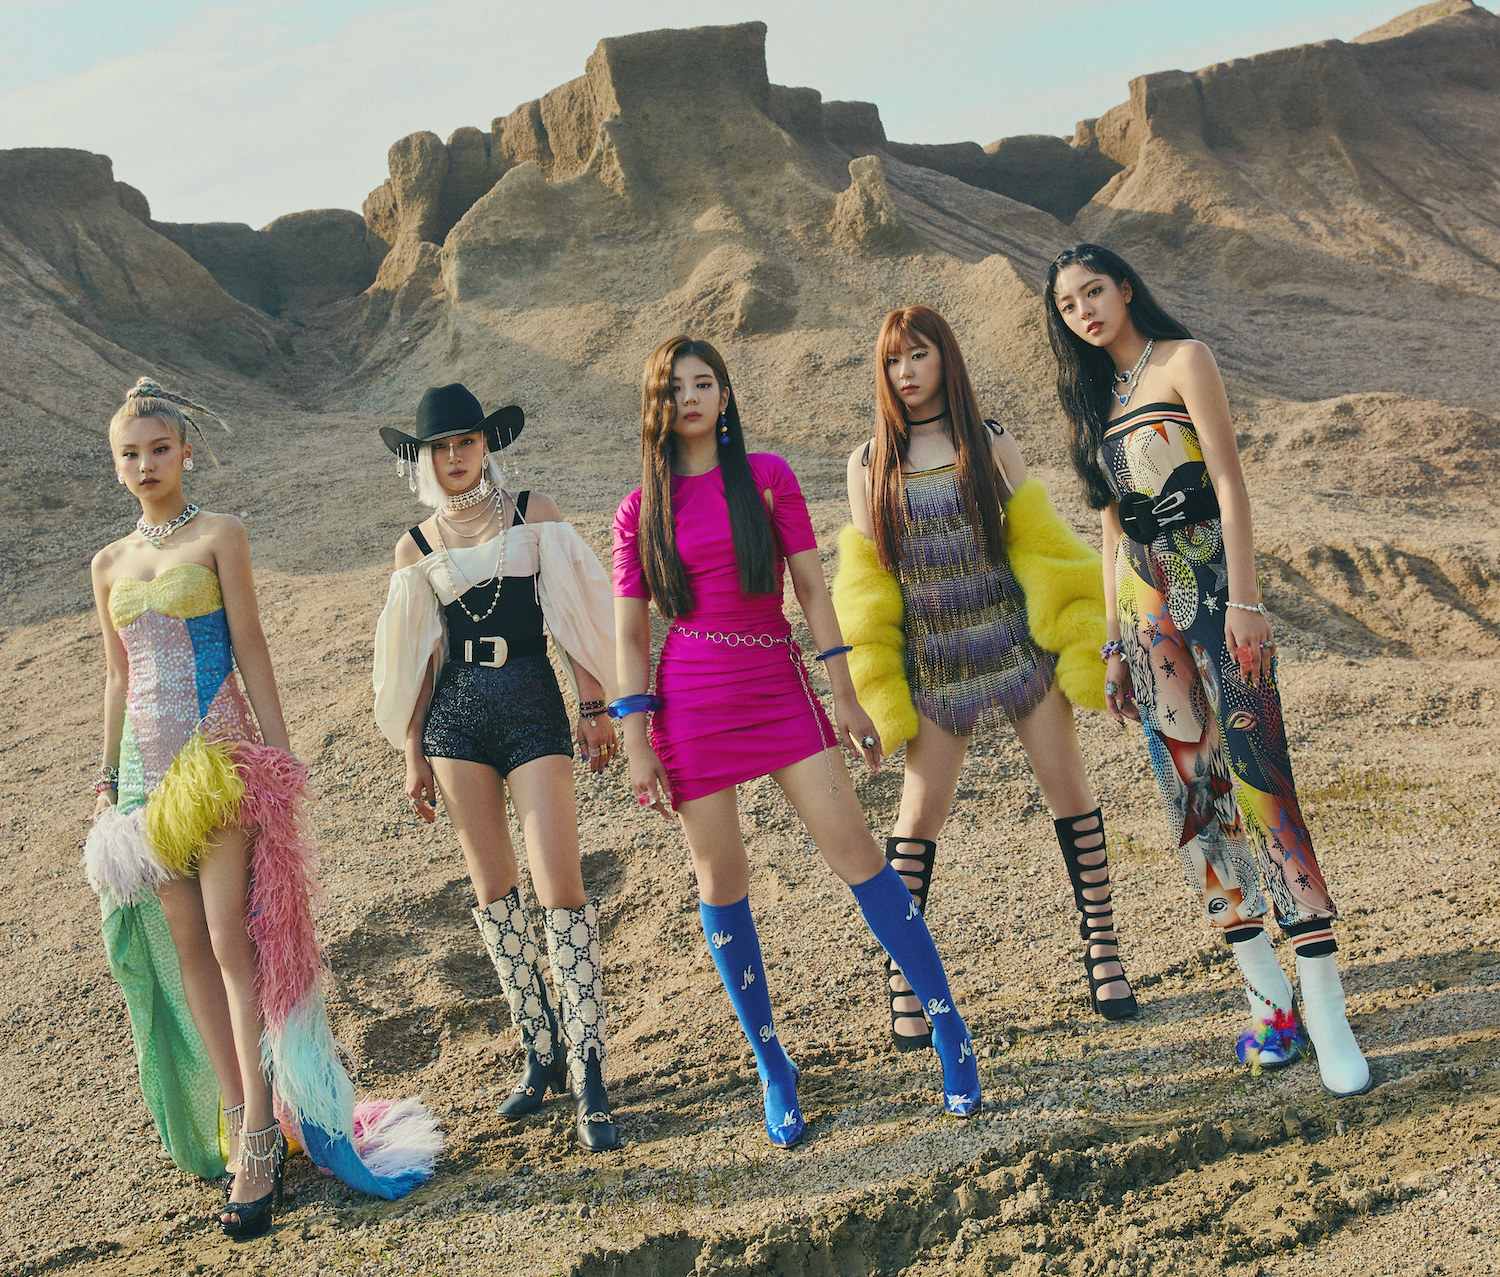 Each member of ITZY poses in the desert in high heels, dresses, and sparkling jewelry  